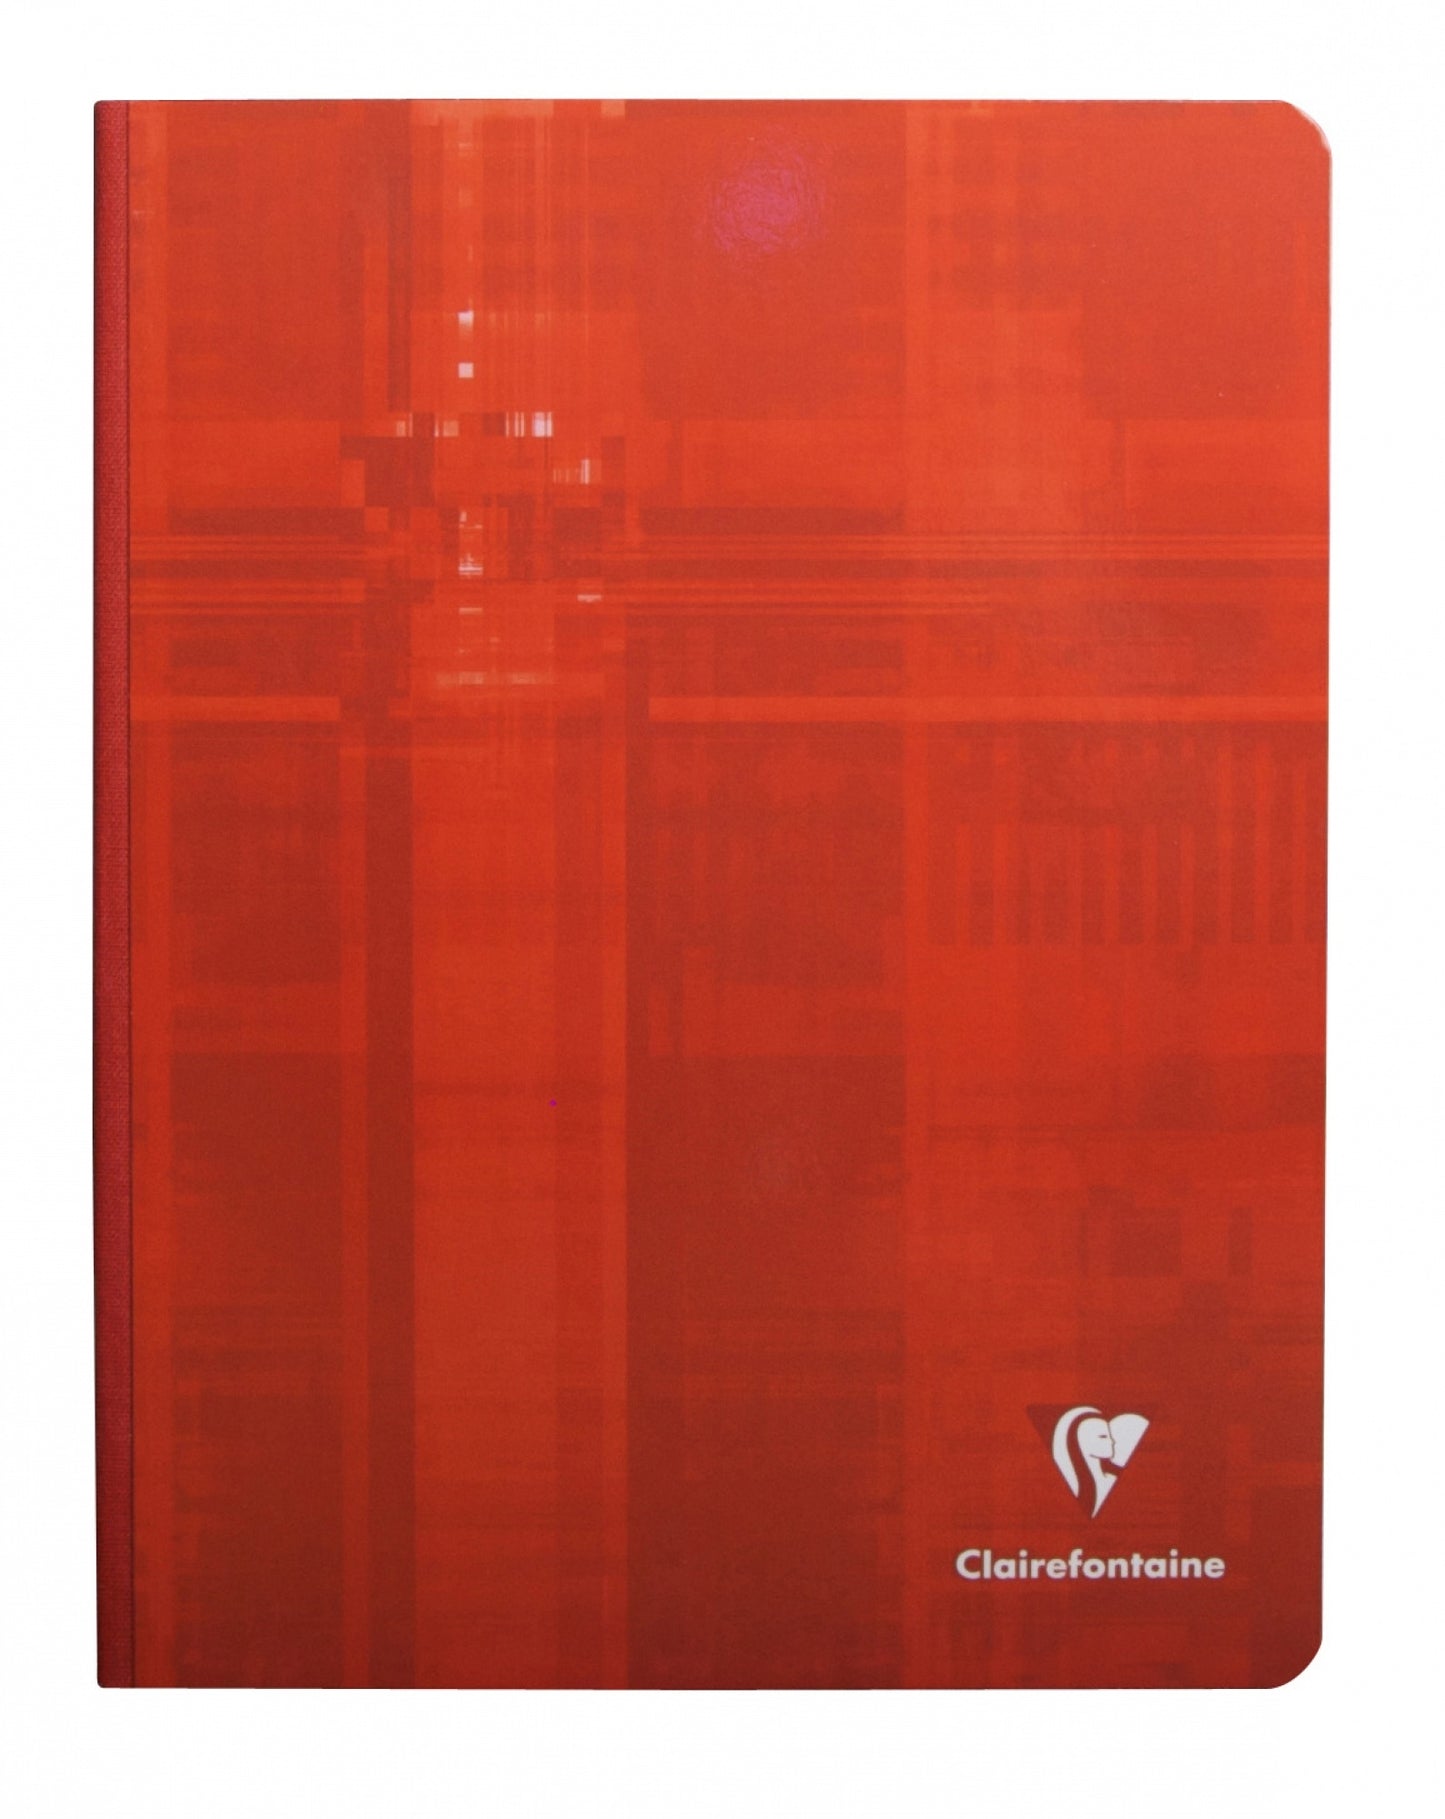 Clairefontaine #69741 Classic French Ruled Clothbound Notebook (6.75 x 8.75) (Assorted)